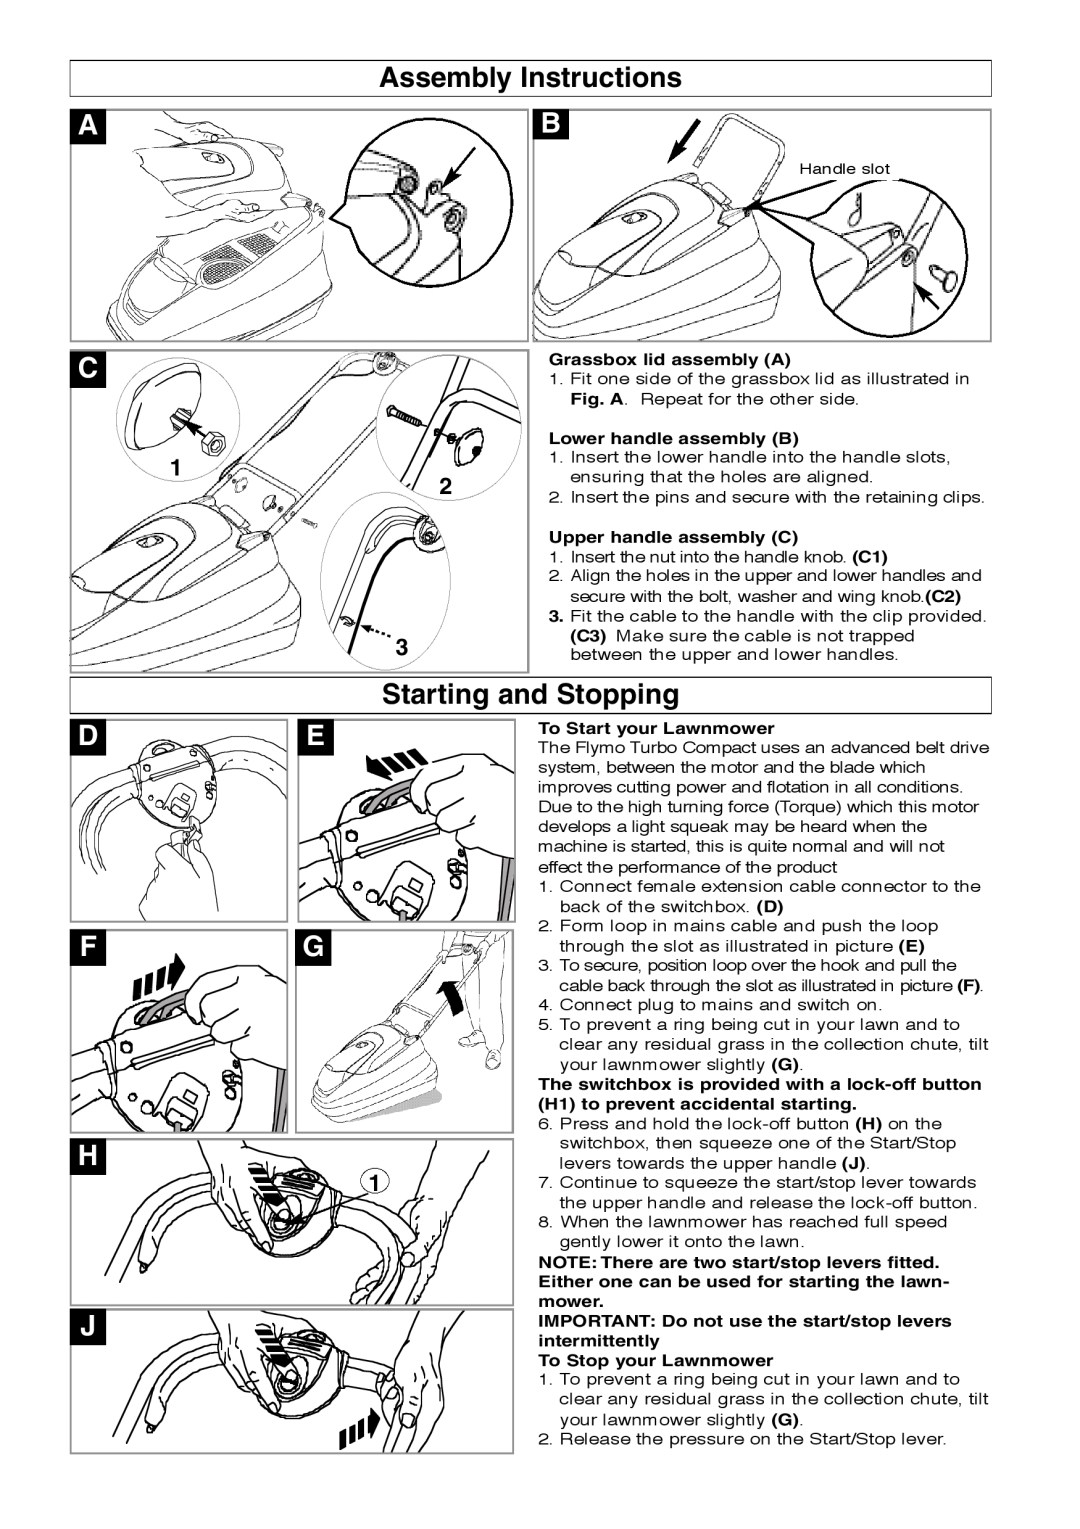 Flymo Turbo Compact manual Assembly Instructions, Starting and Stopping, 1 2 